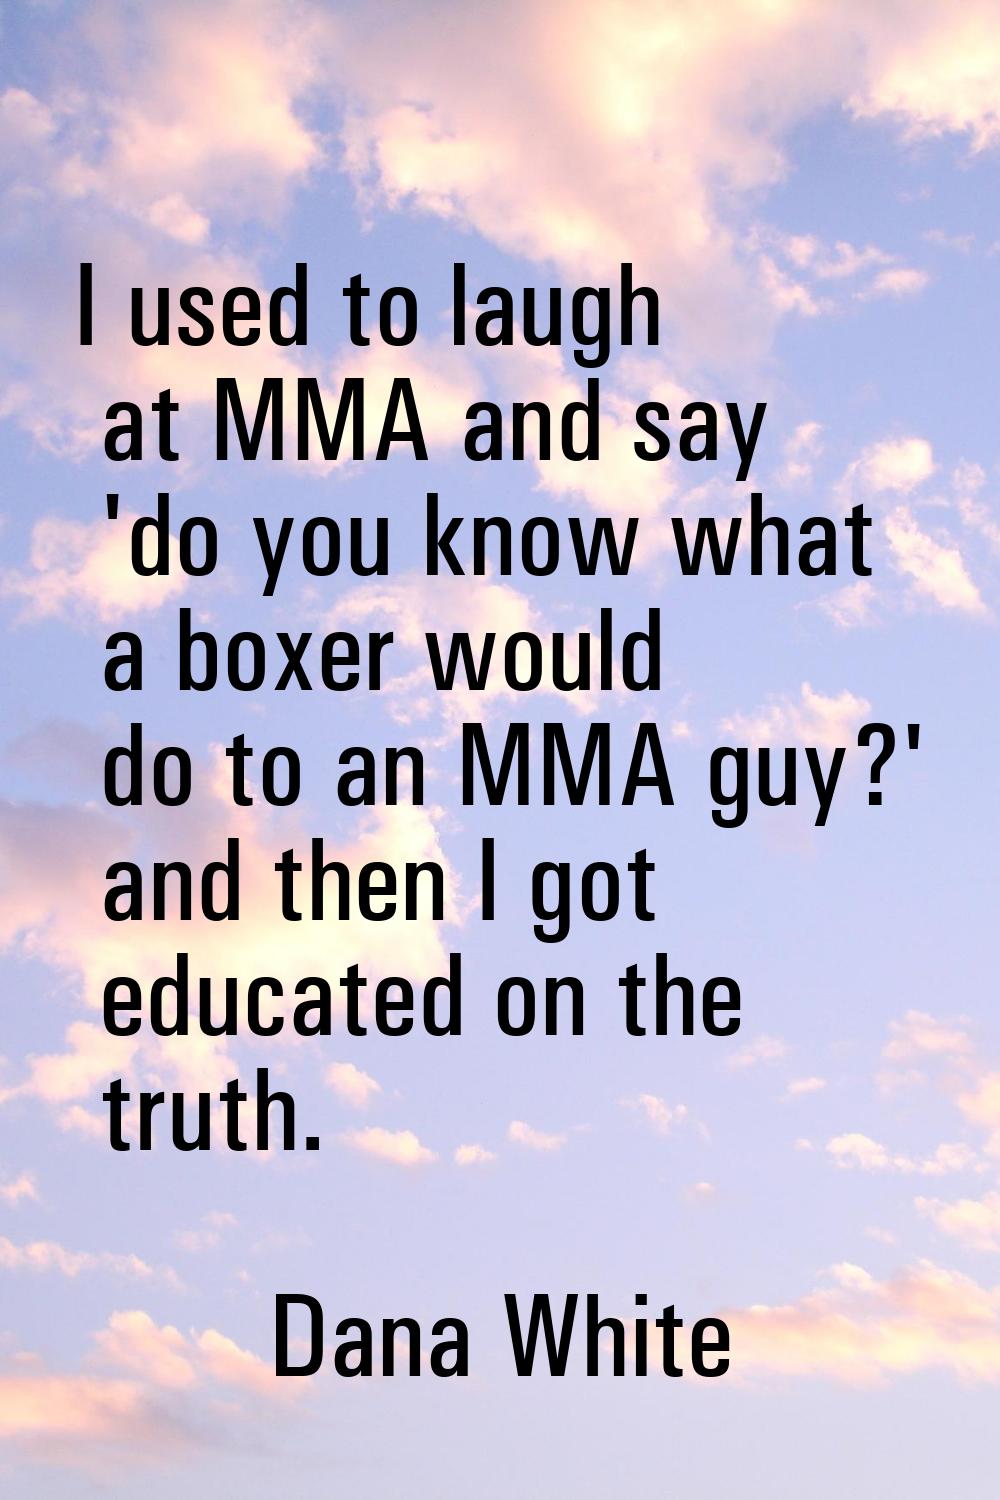 I used to laugh at MMA and say 'do you know what a boxer would do to an MMA guy?' and then I got ed